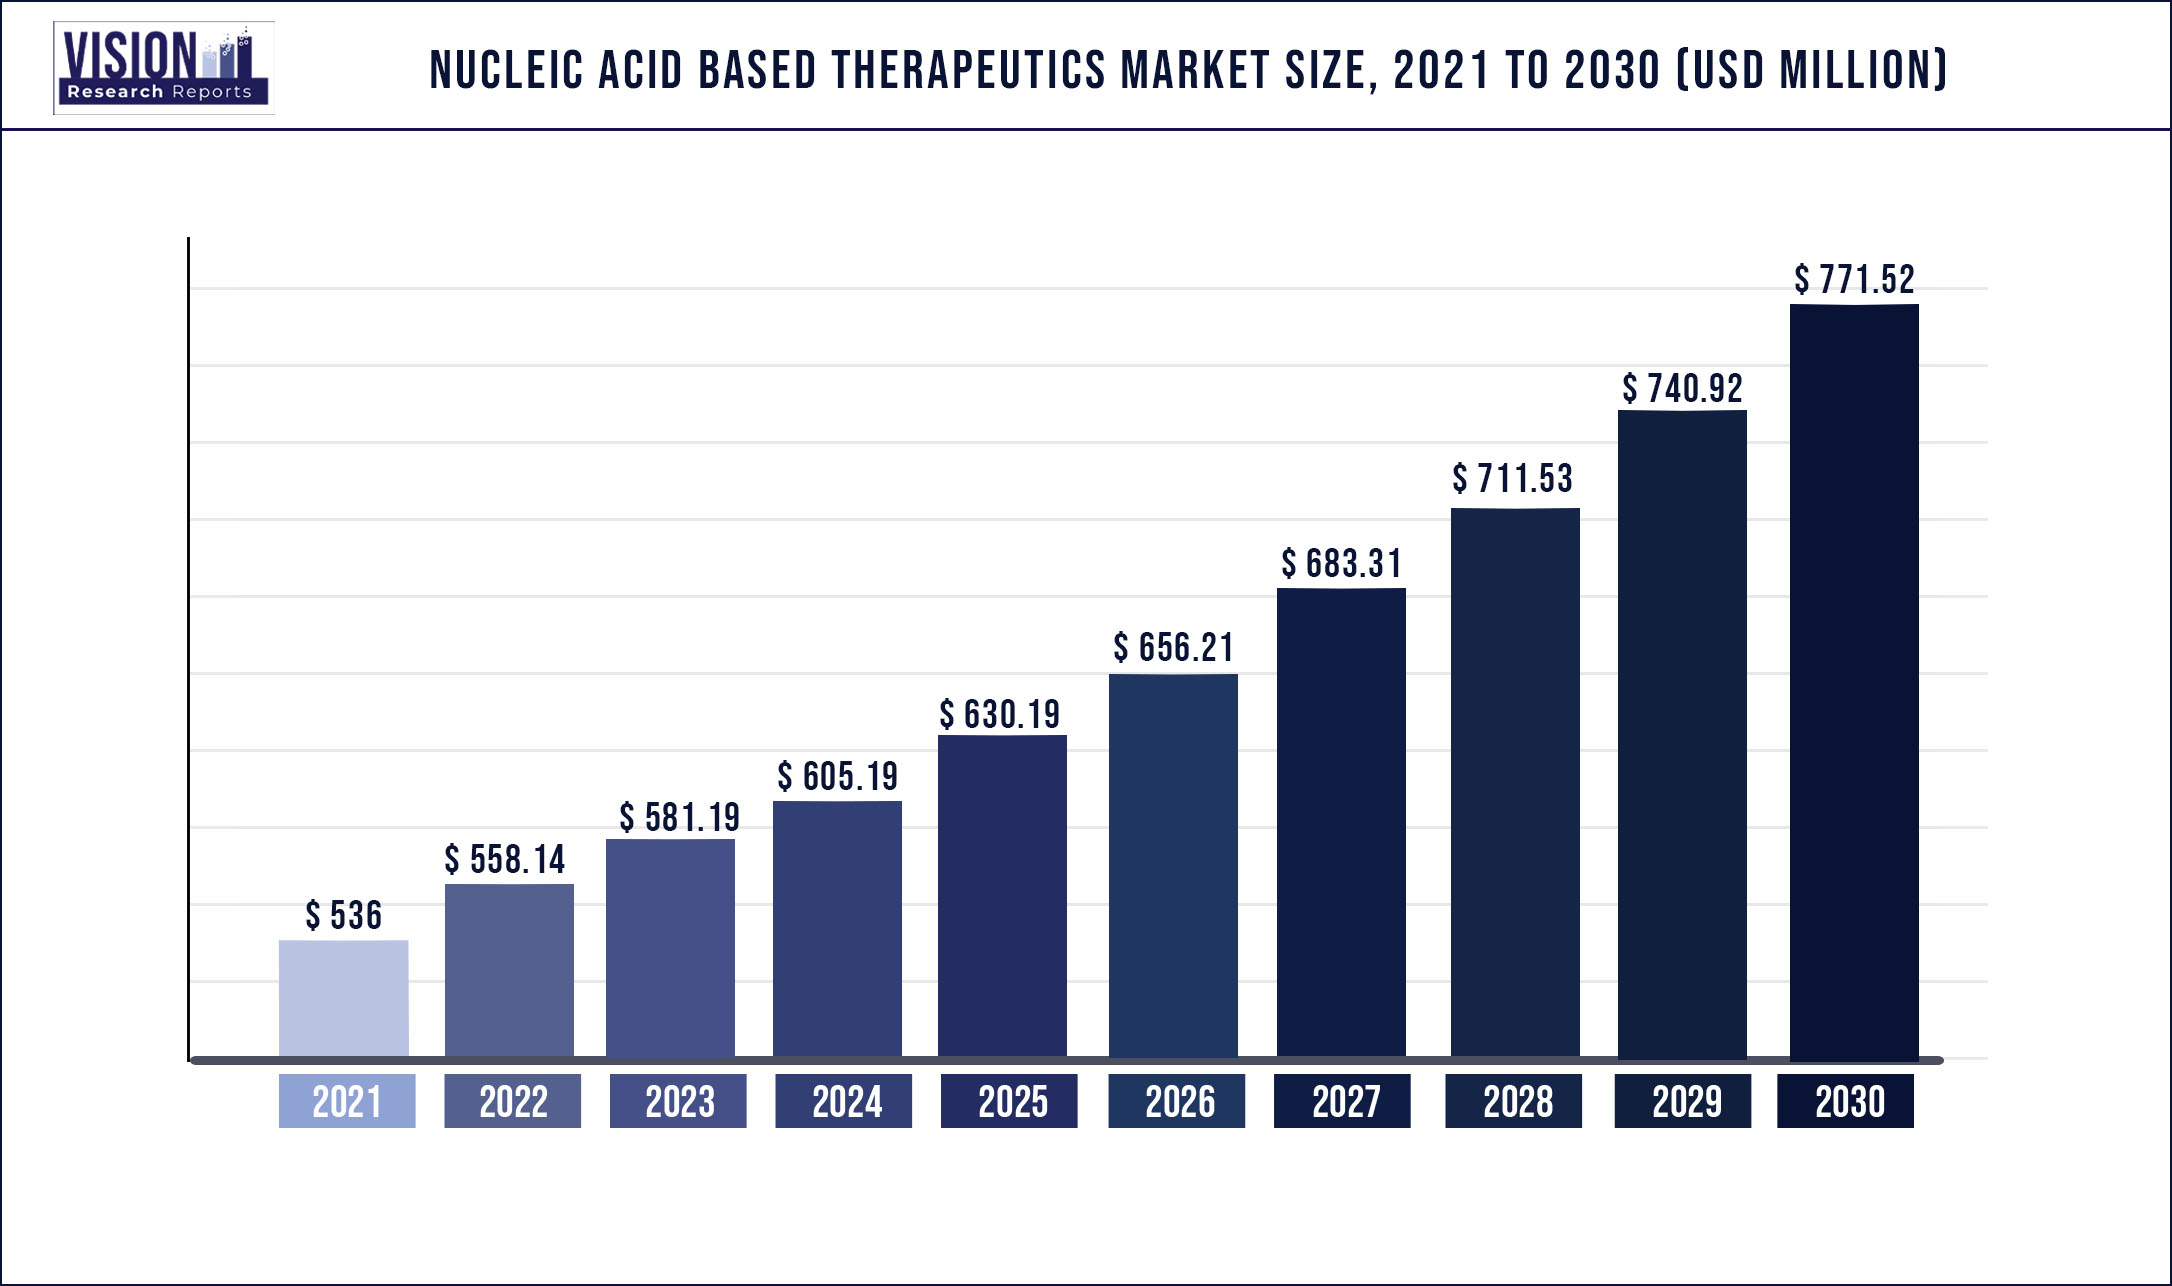 Nucleic Acid Based Therapeutics Market Size 2021 to 2030